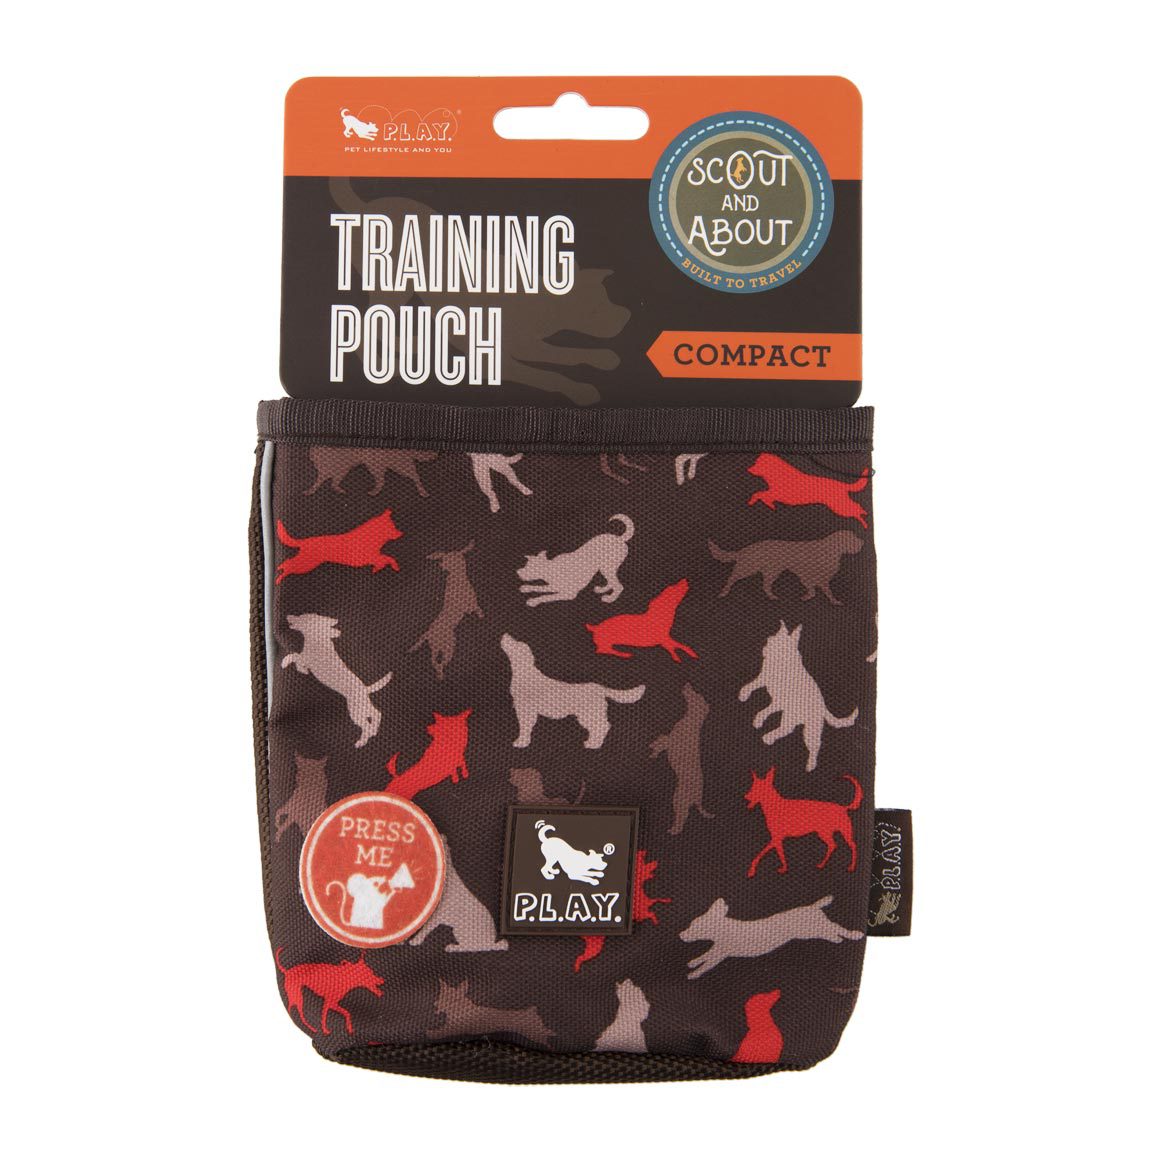 checked Scout & About Compact Training Pouch Image 5